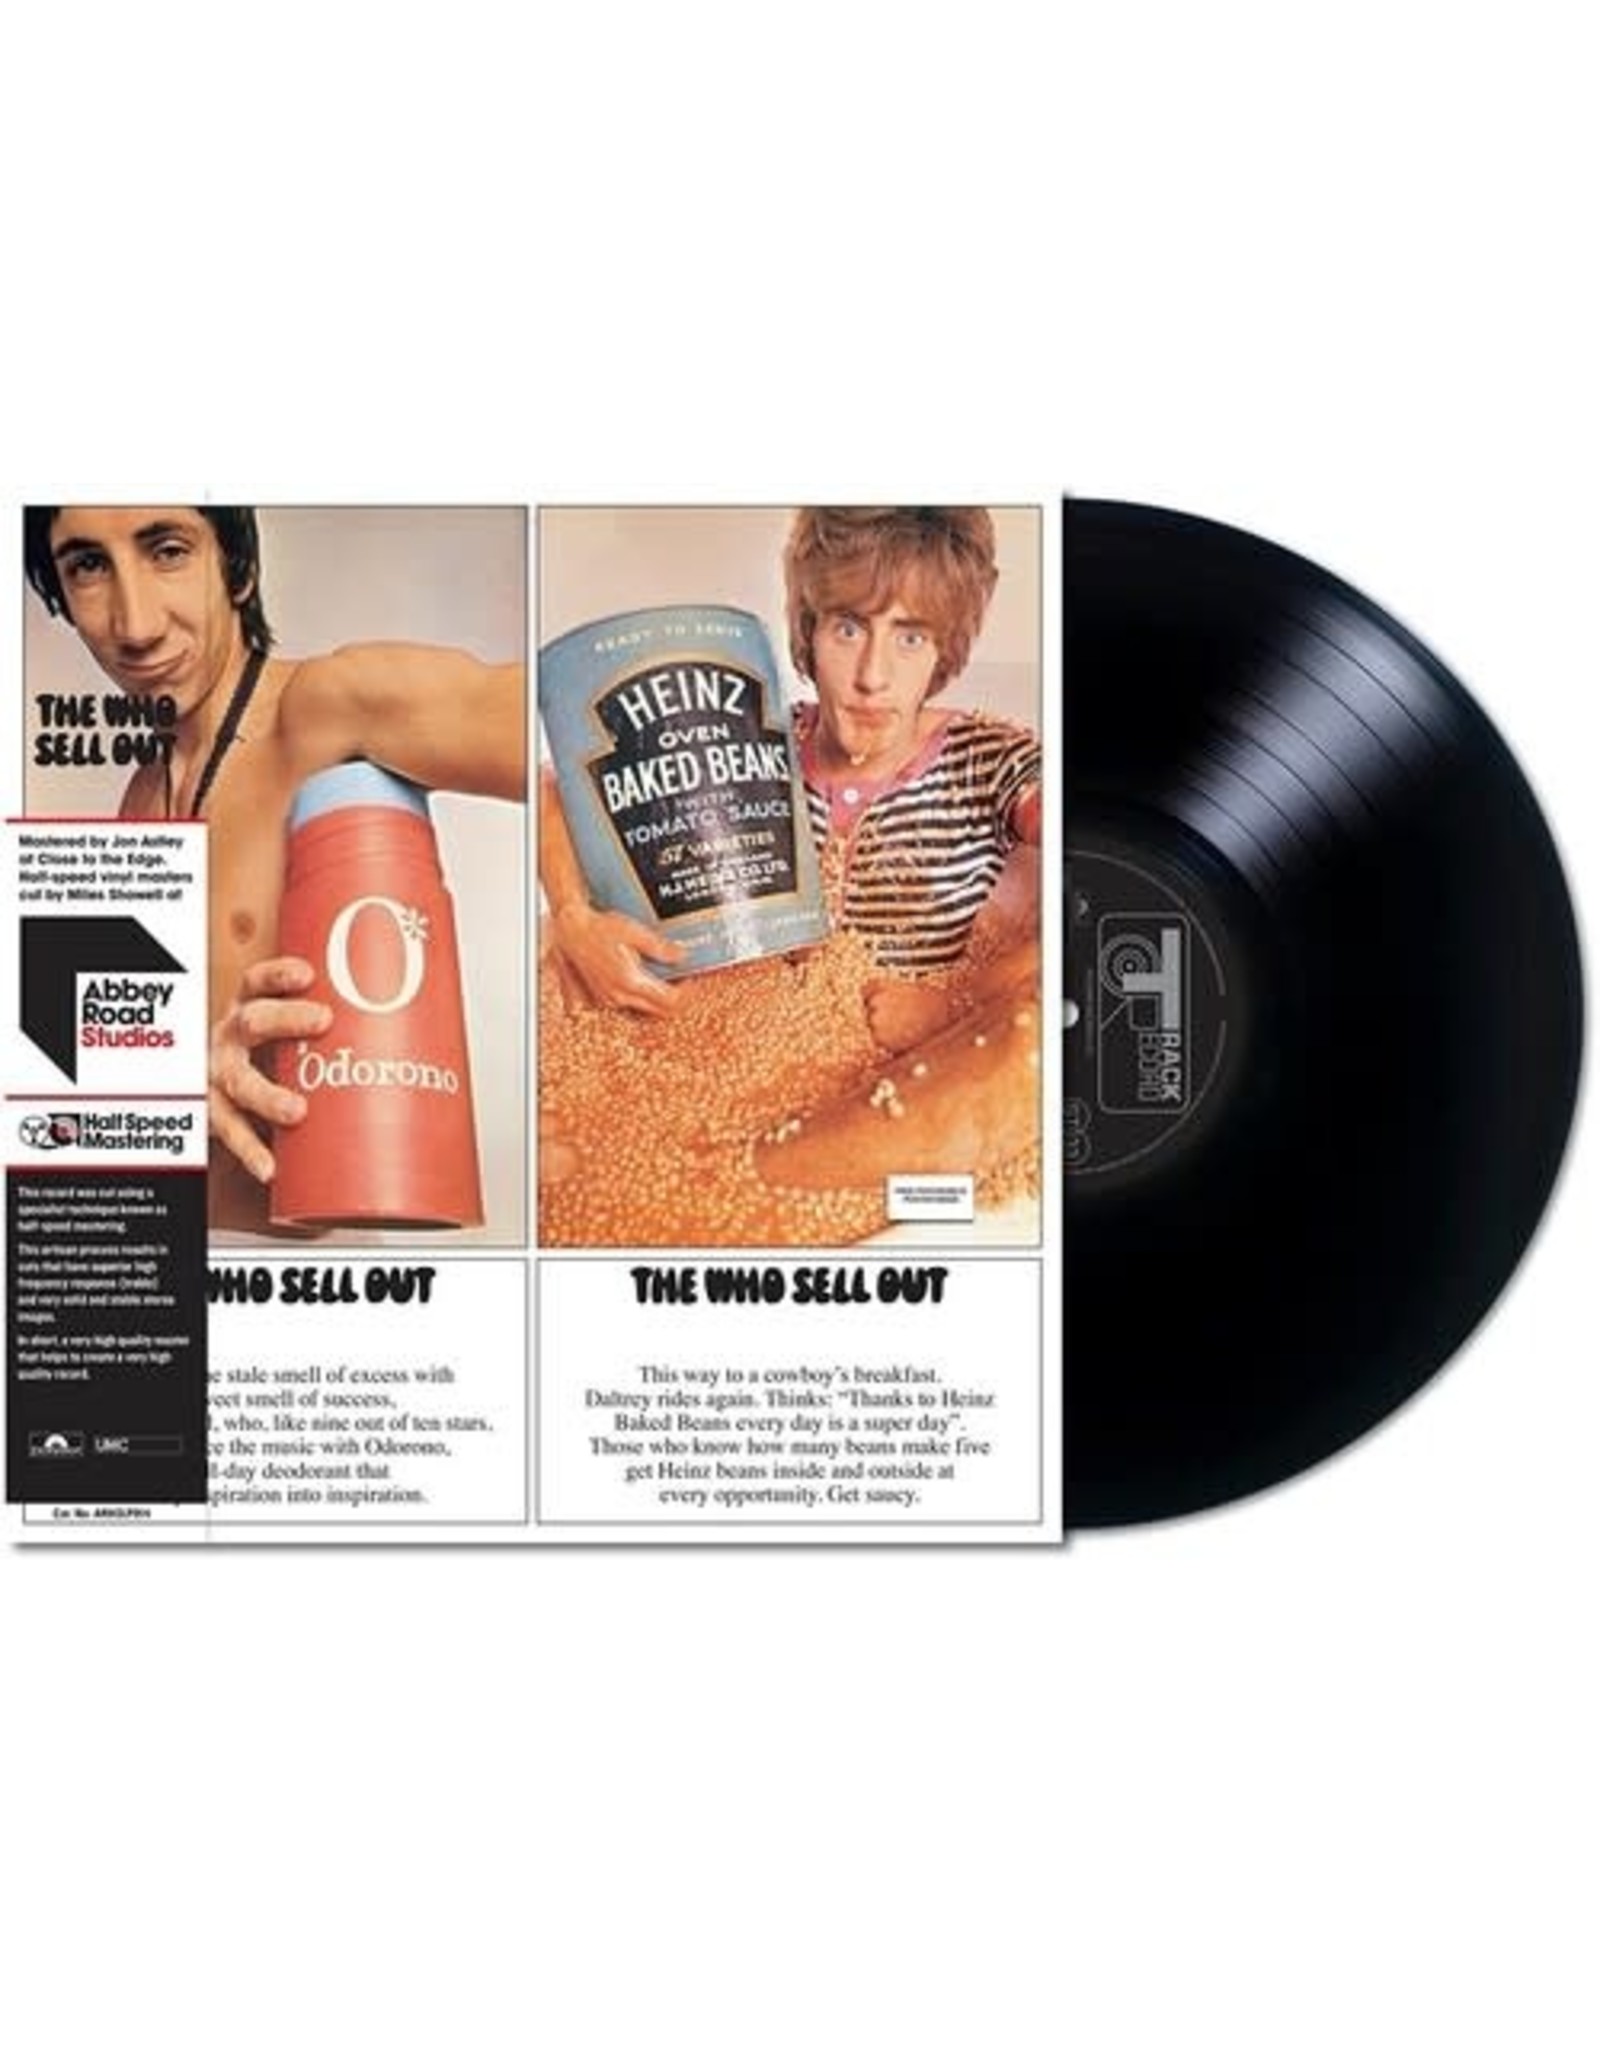 New Vinyl The Who - The Who Sell Out (Half-Speed Mastering) LP